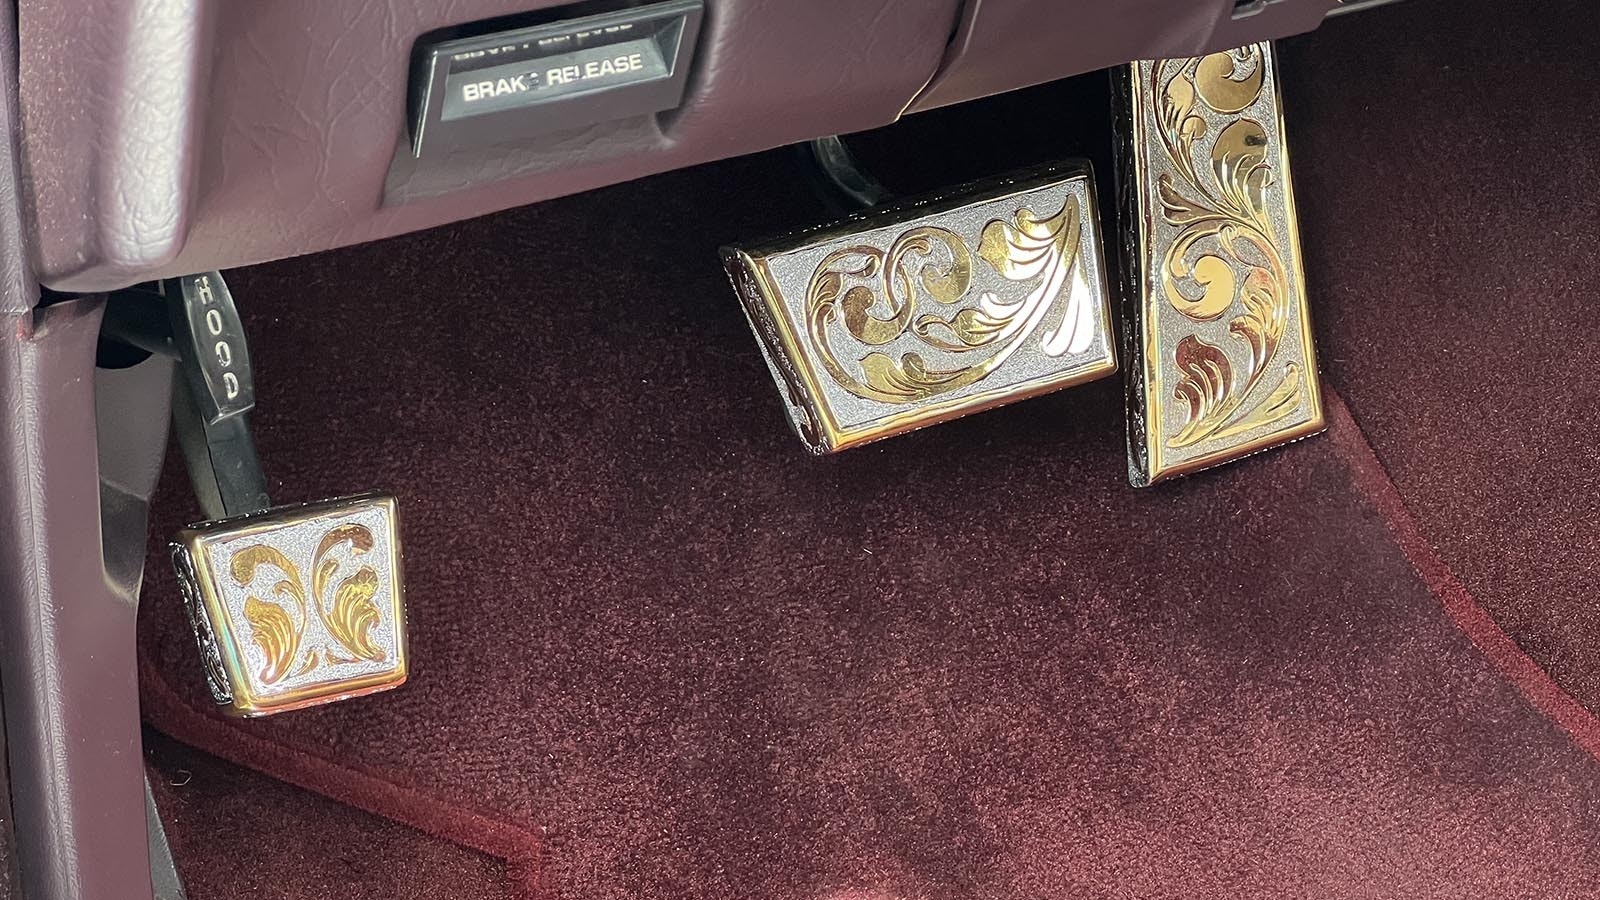 Even the pedals are engraved in chrome and gold plate.